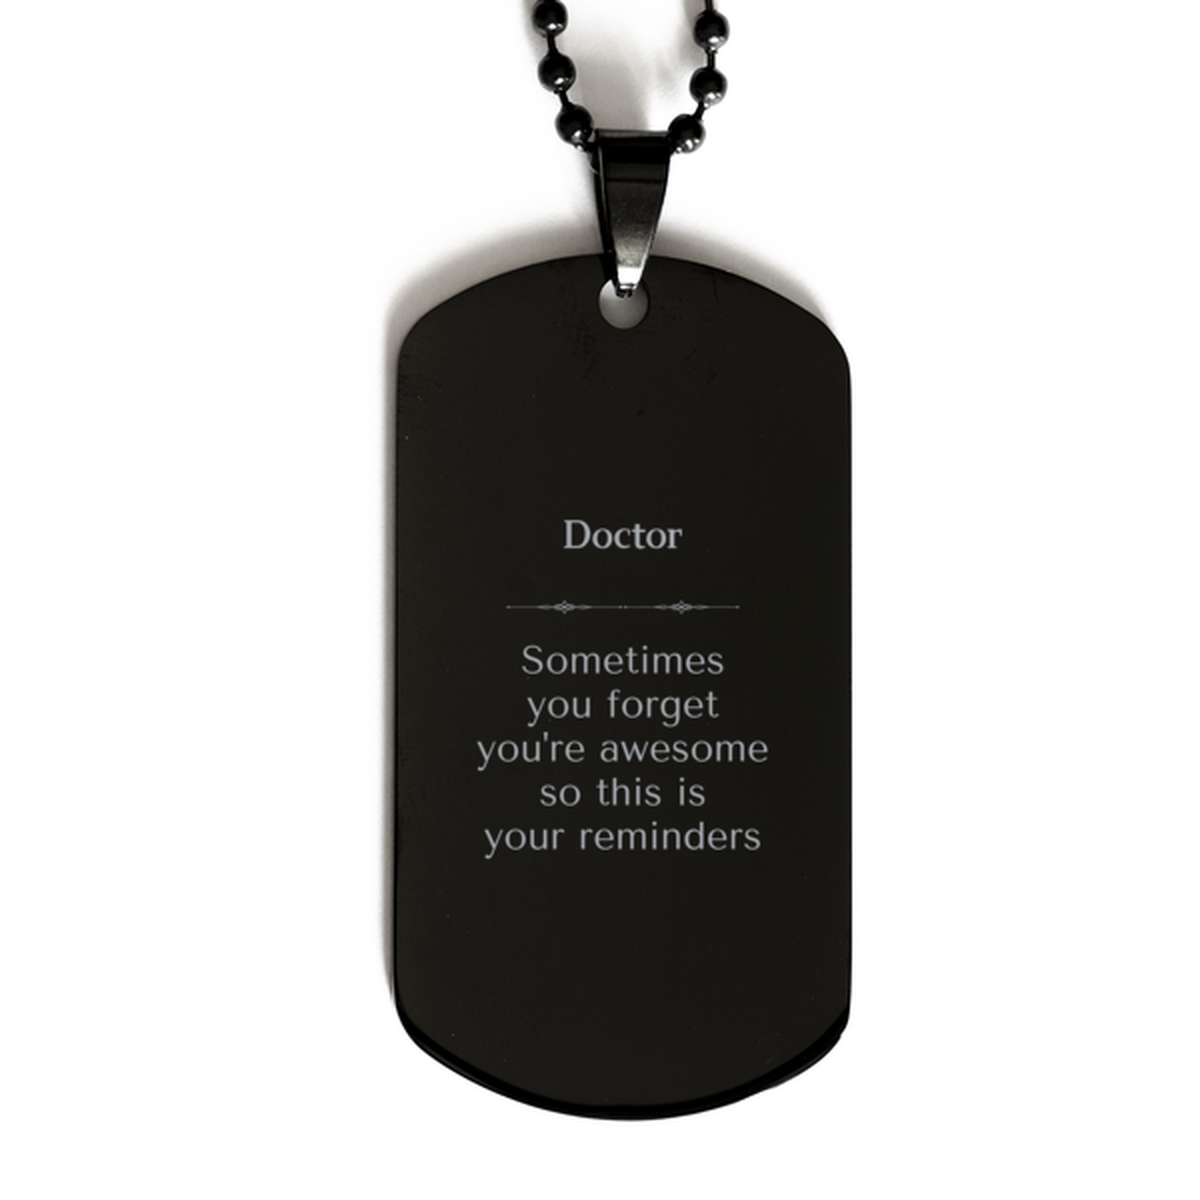 Sentimental Doctor Black Dog Tag, Doctor Sometimes you forget you're awesome so this is your reminders, Graduation Christmas Birthday Gifts for Doctor, Men, Women, Coworkers